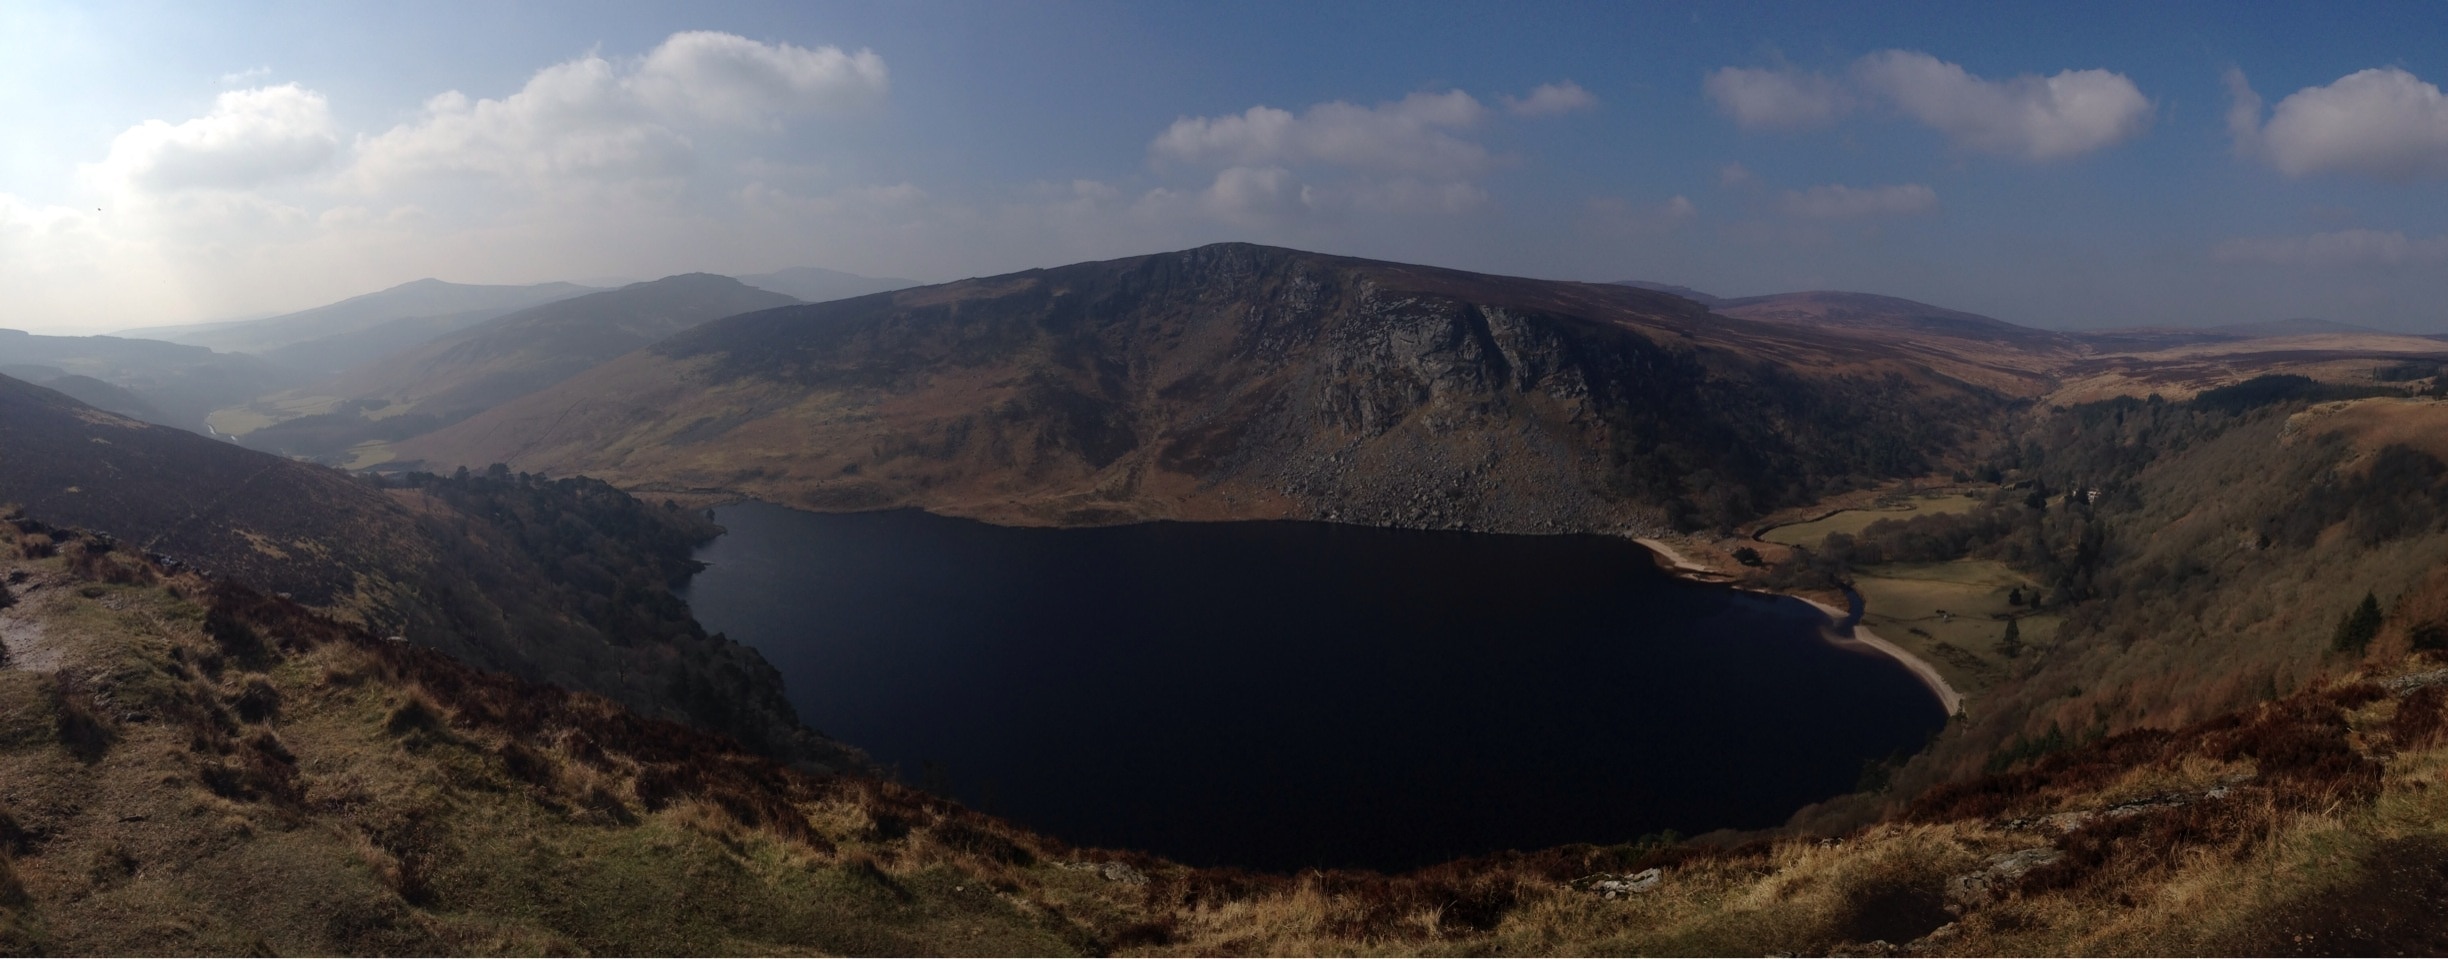 Exploring the breathtaking Wicklow Mountains, IRELAND.

http://www.theroamingrenegades.com/2015/04/exploring-breathtaking-Wicklow-Mountains.html

Whilst in Dublin recently to celebrate St Patrick's day we wanted to get out of the city and see some of the famous Irish countryside. We had visited Dublin last year and pretty much done everything there was to do in this beautiful city and so took the opportunity of our second visit to spread our wings a little and take in the breath taking mountains lying only a short trip from the city centre.... Here's our exploration of the amazing Wicklow Mountains.
